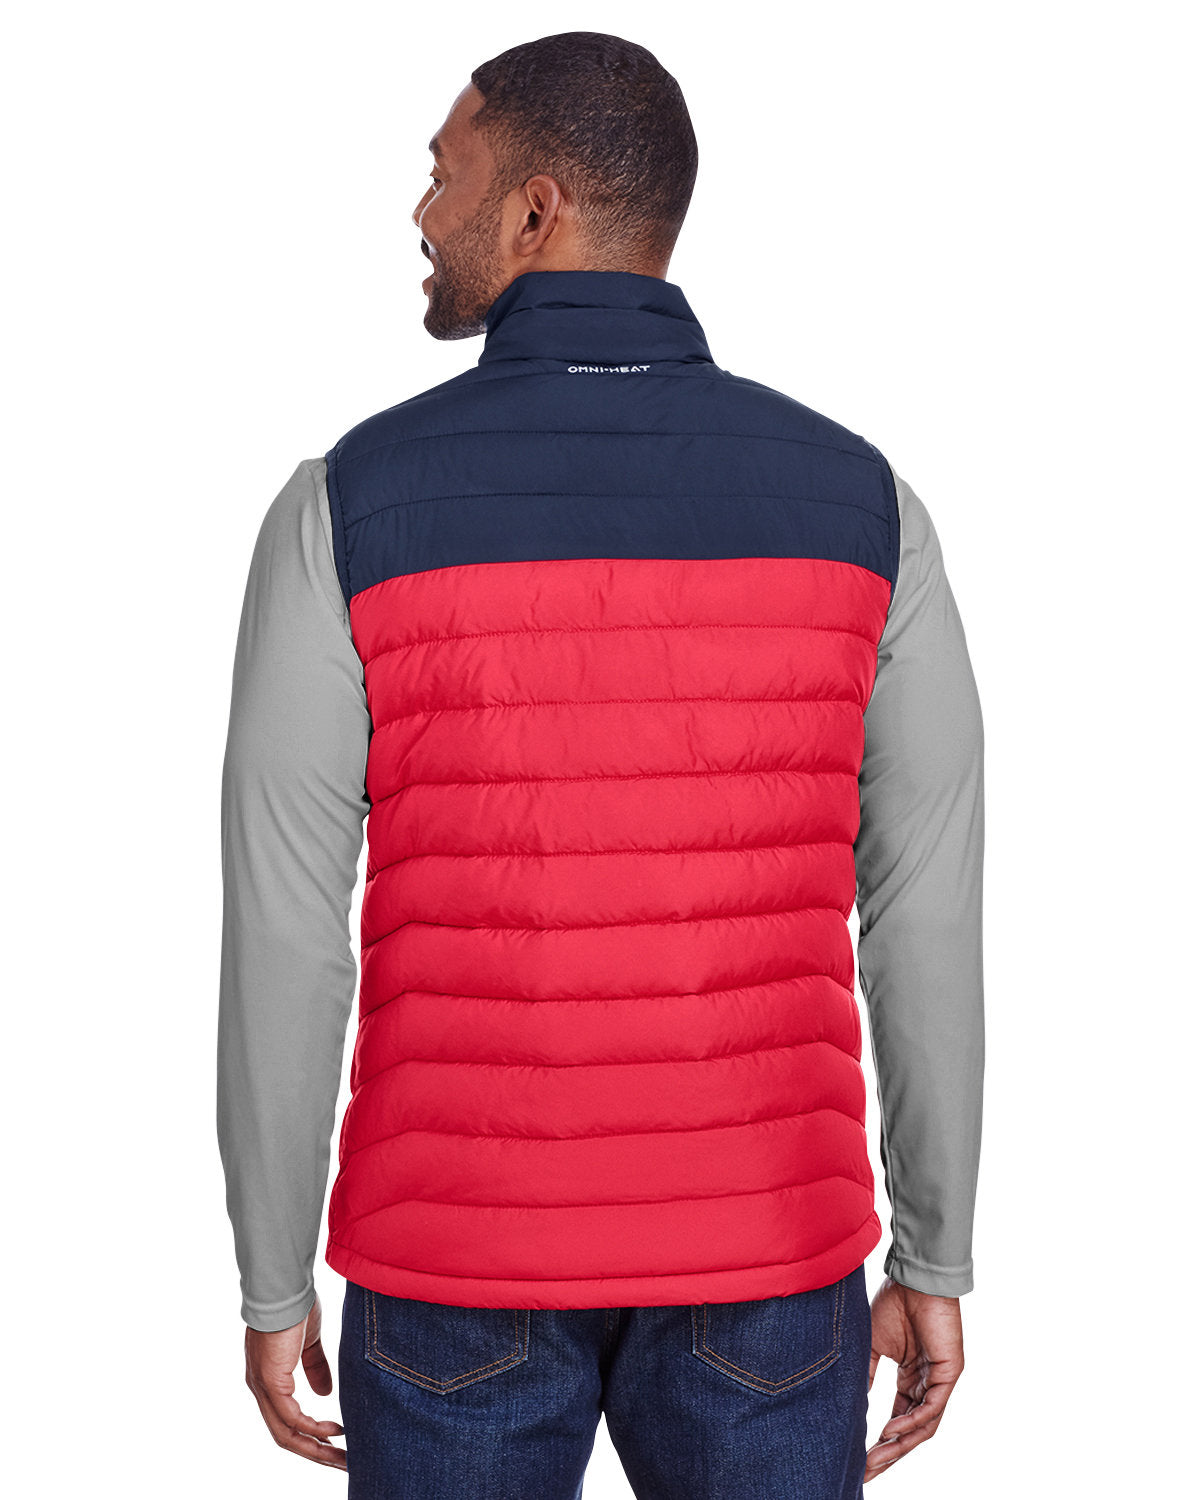 columbia_1748031_mtn red/ col nvy_company_logo_jackets